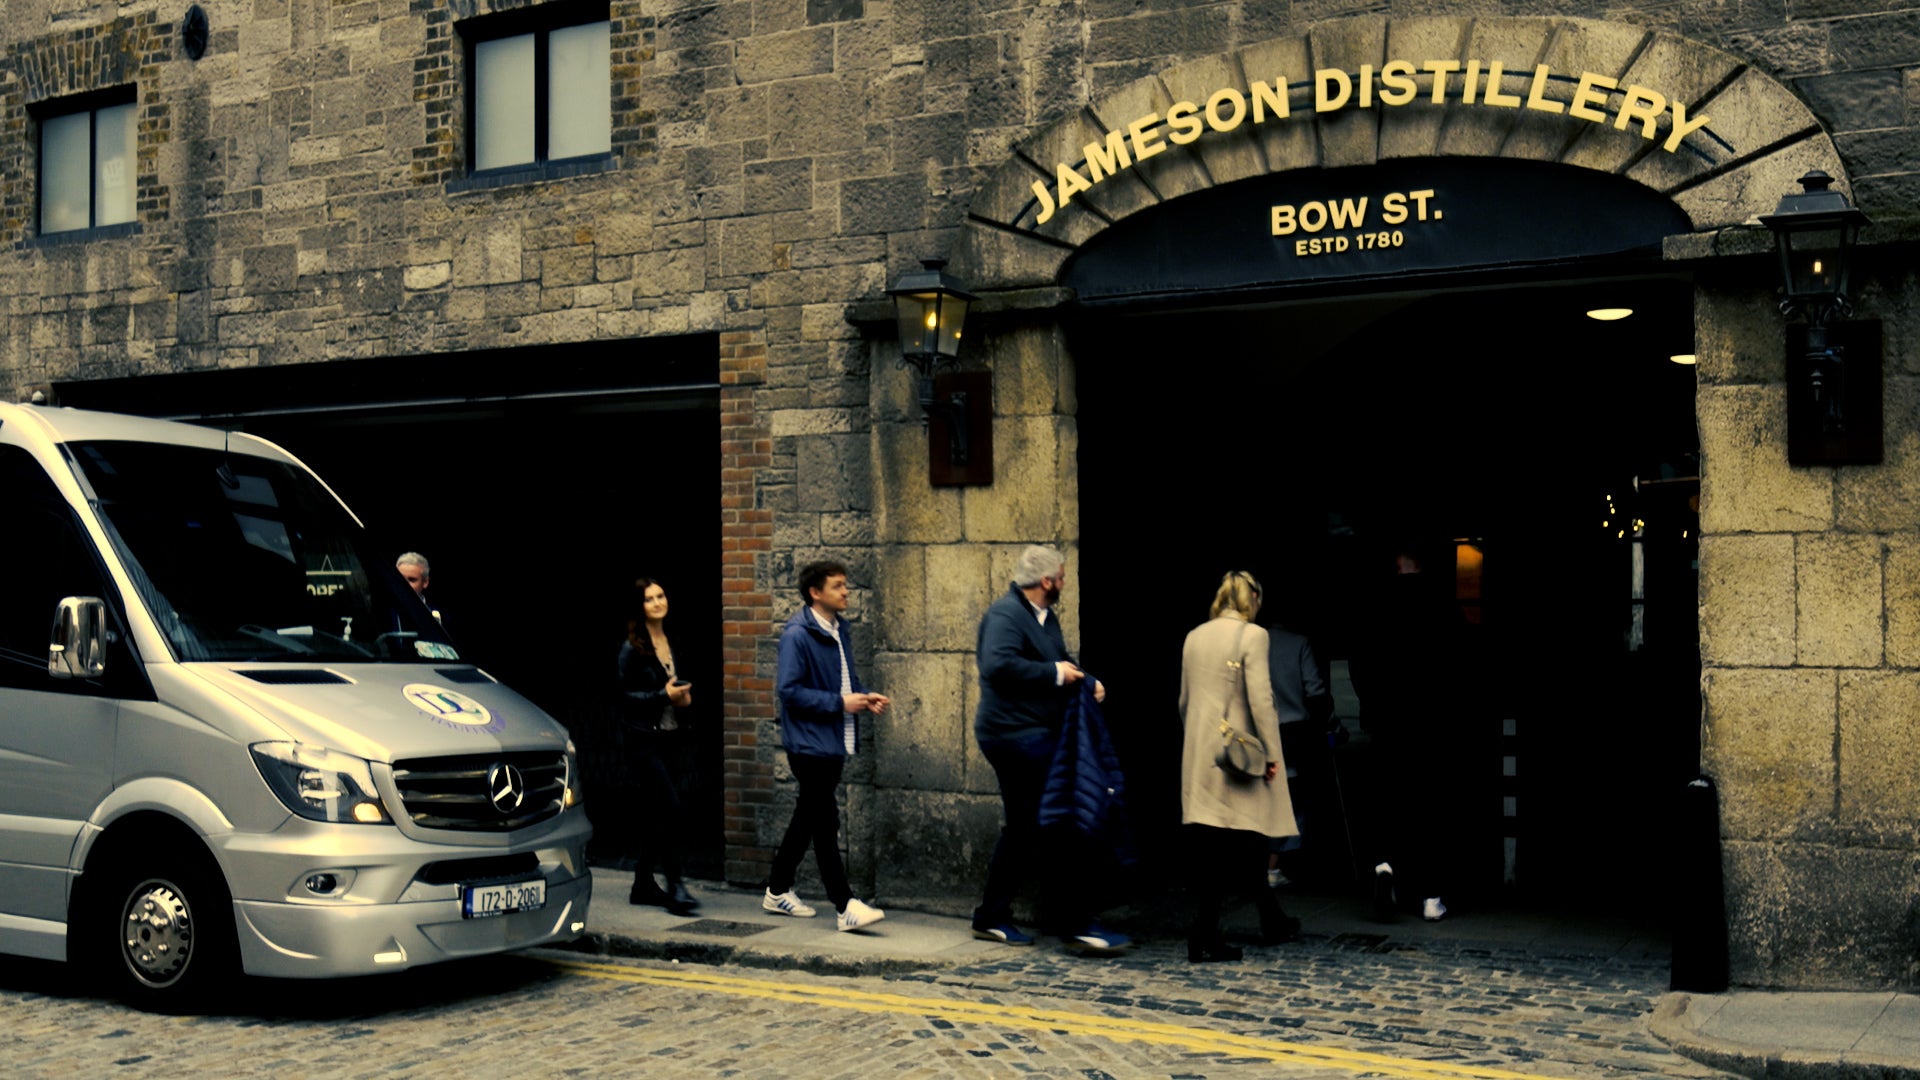 A group of people enter the Jameson Distillery in Bow Street